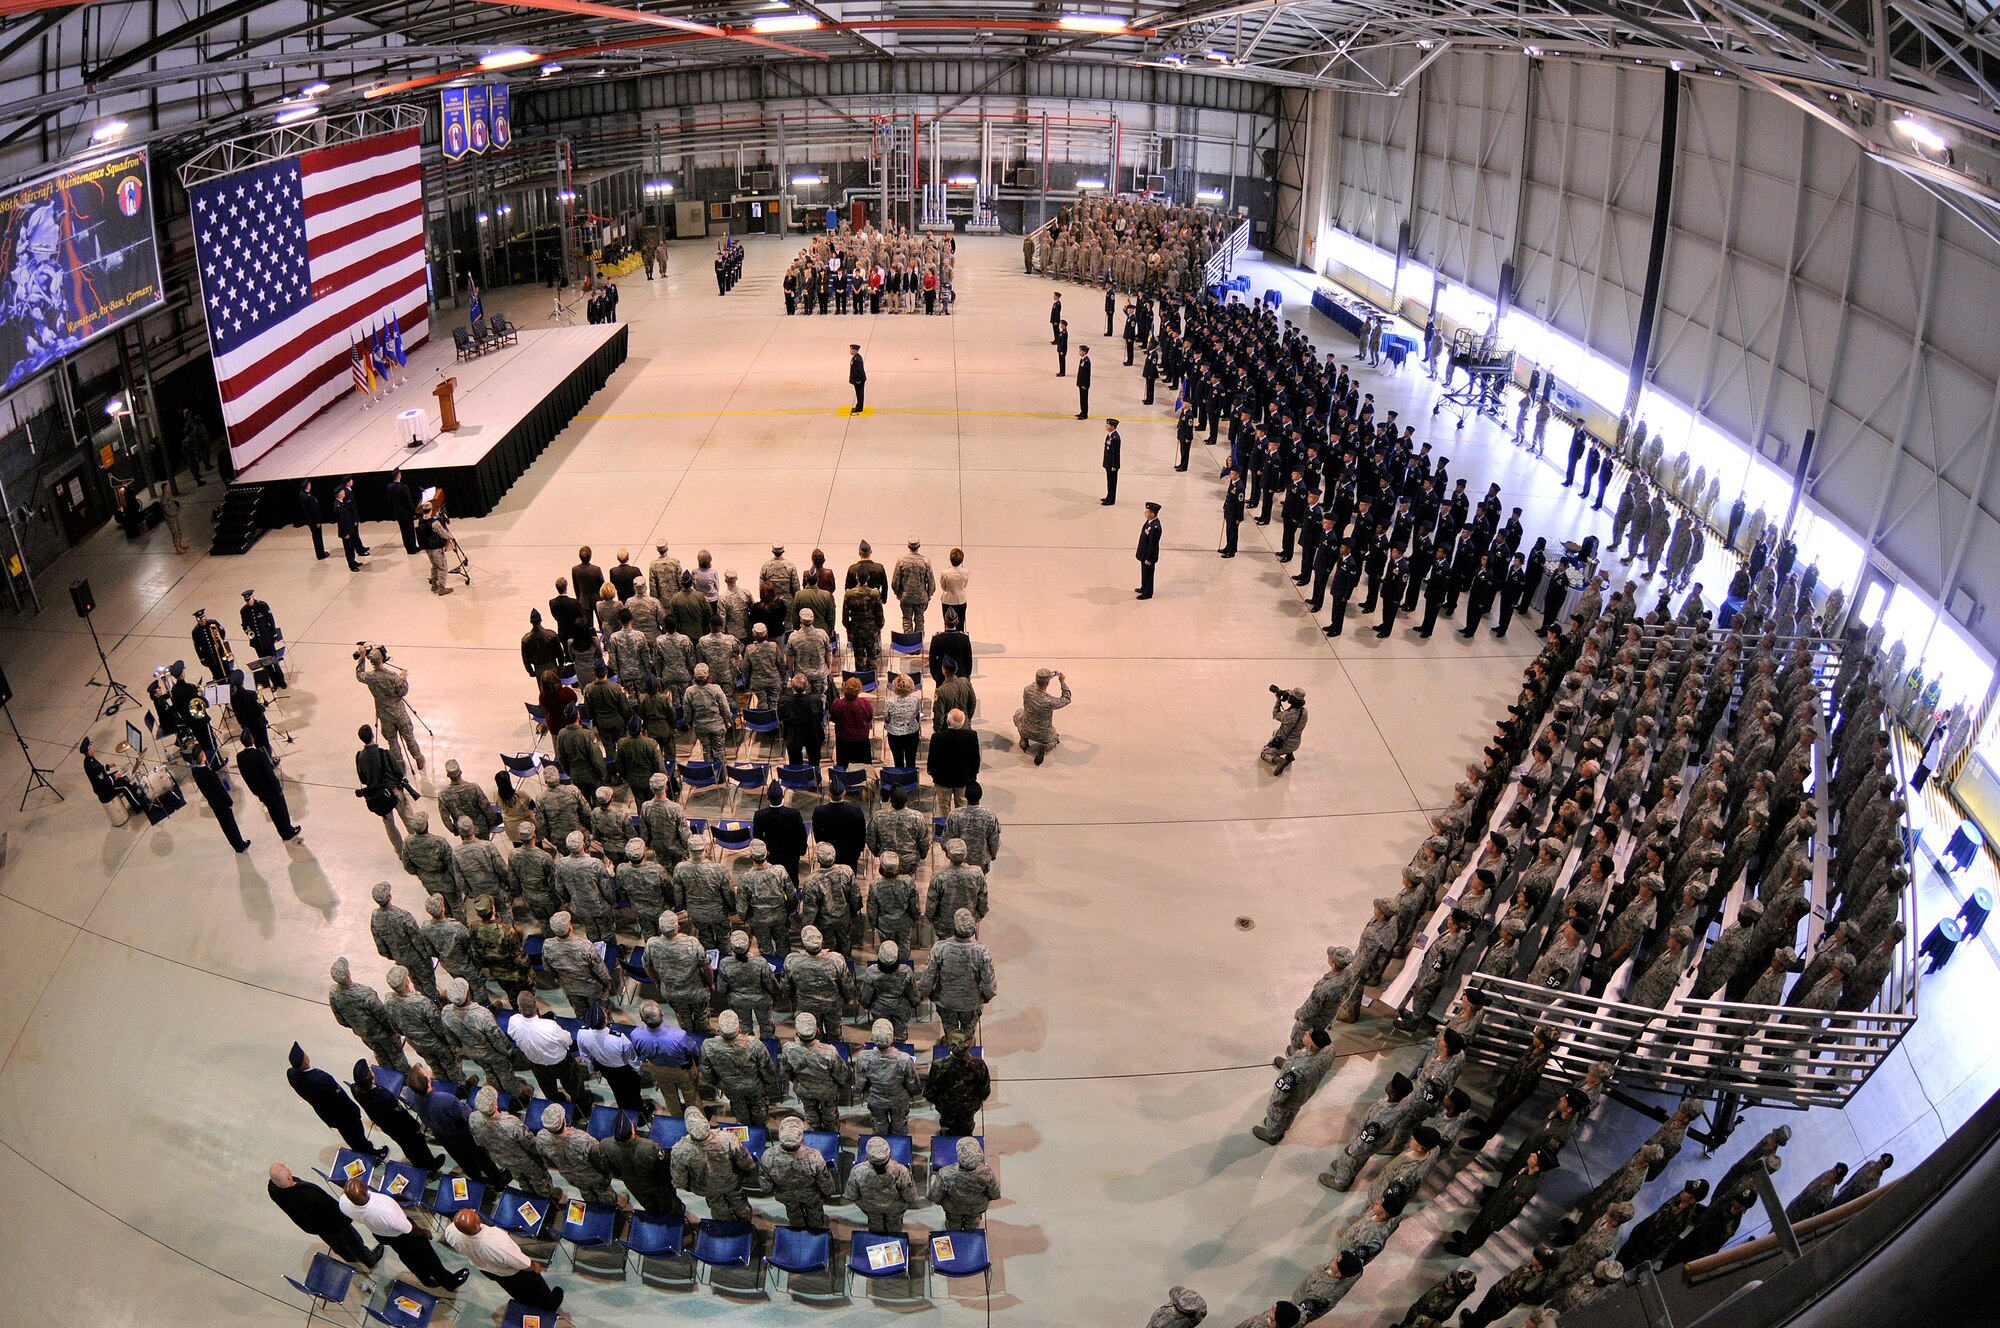 U.S. Air Force Airmen from the 435th Air Base Wing participate in a change of command ceremony, Ramstein Air Base, Germany, June 11, 2009. (U.S. Air Force photo by Staff Sgt. Stephen J. Otero)